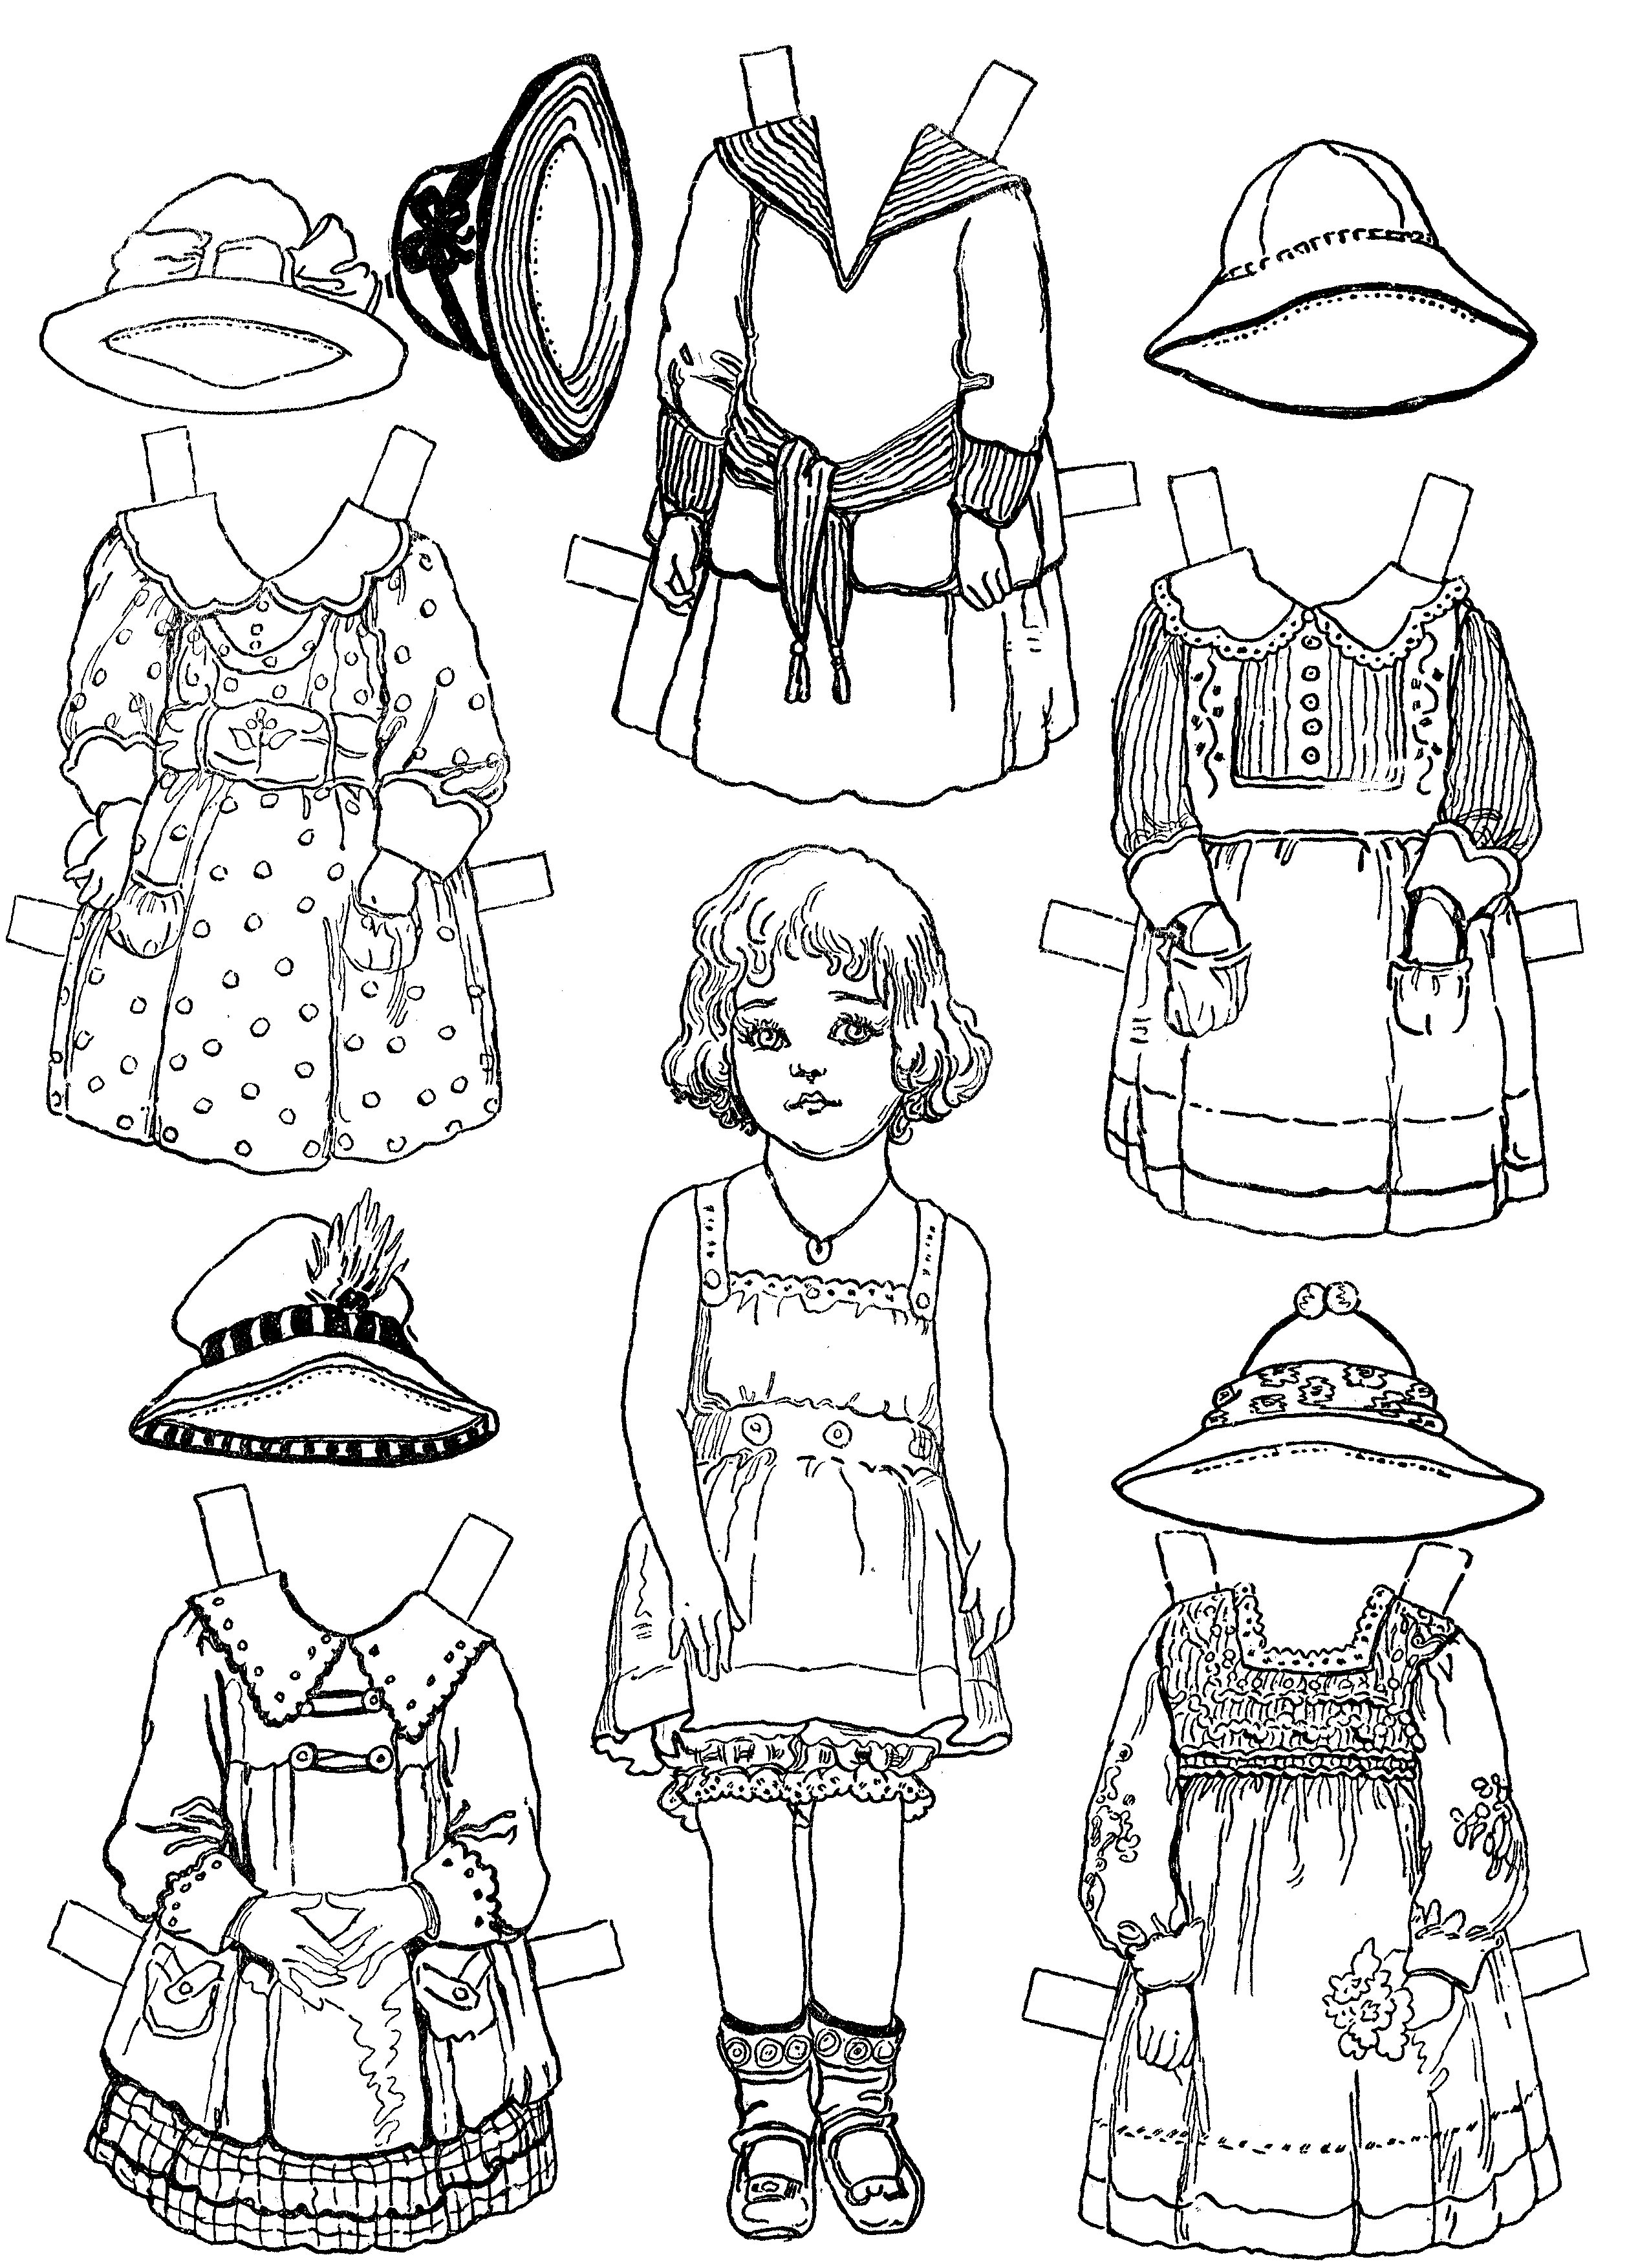 Paper Doll Coloring Pages 5